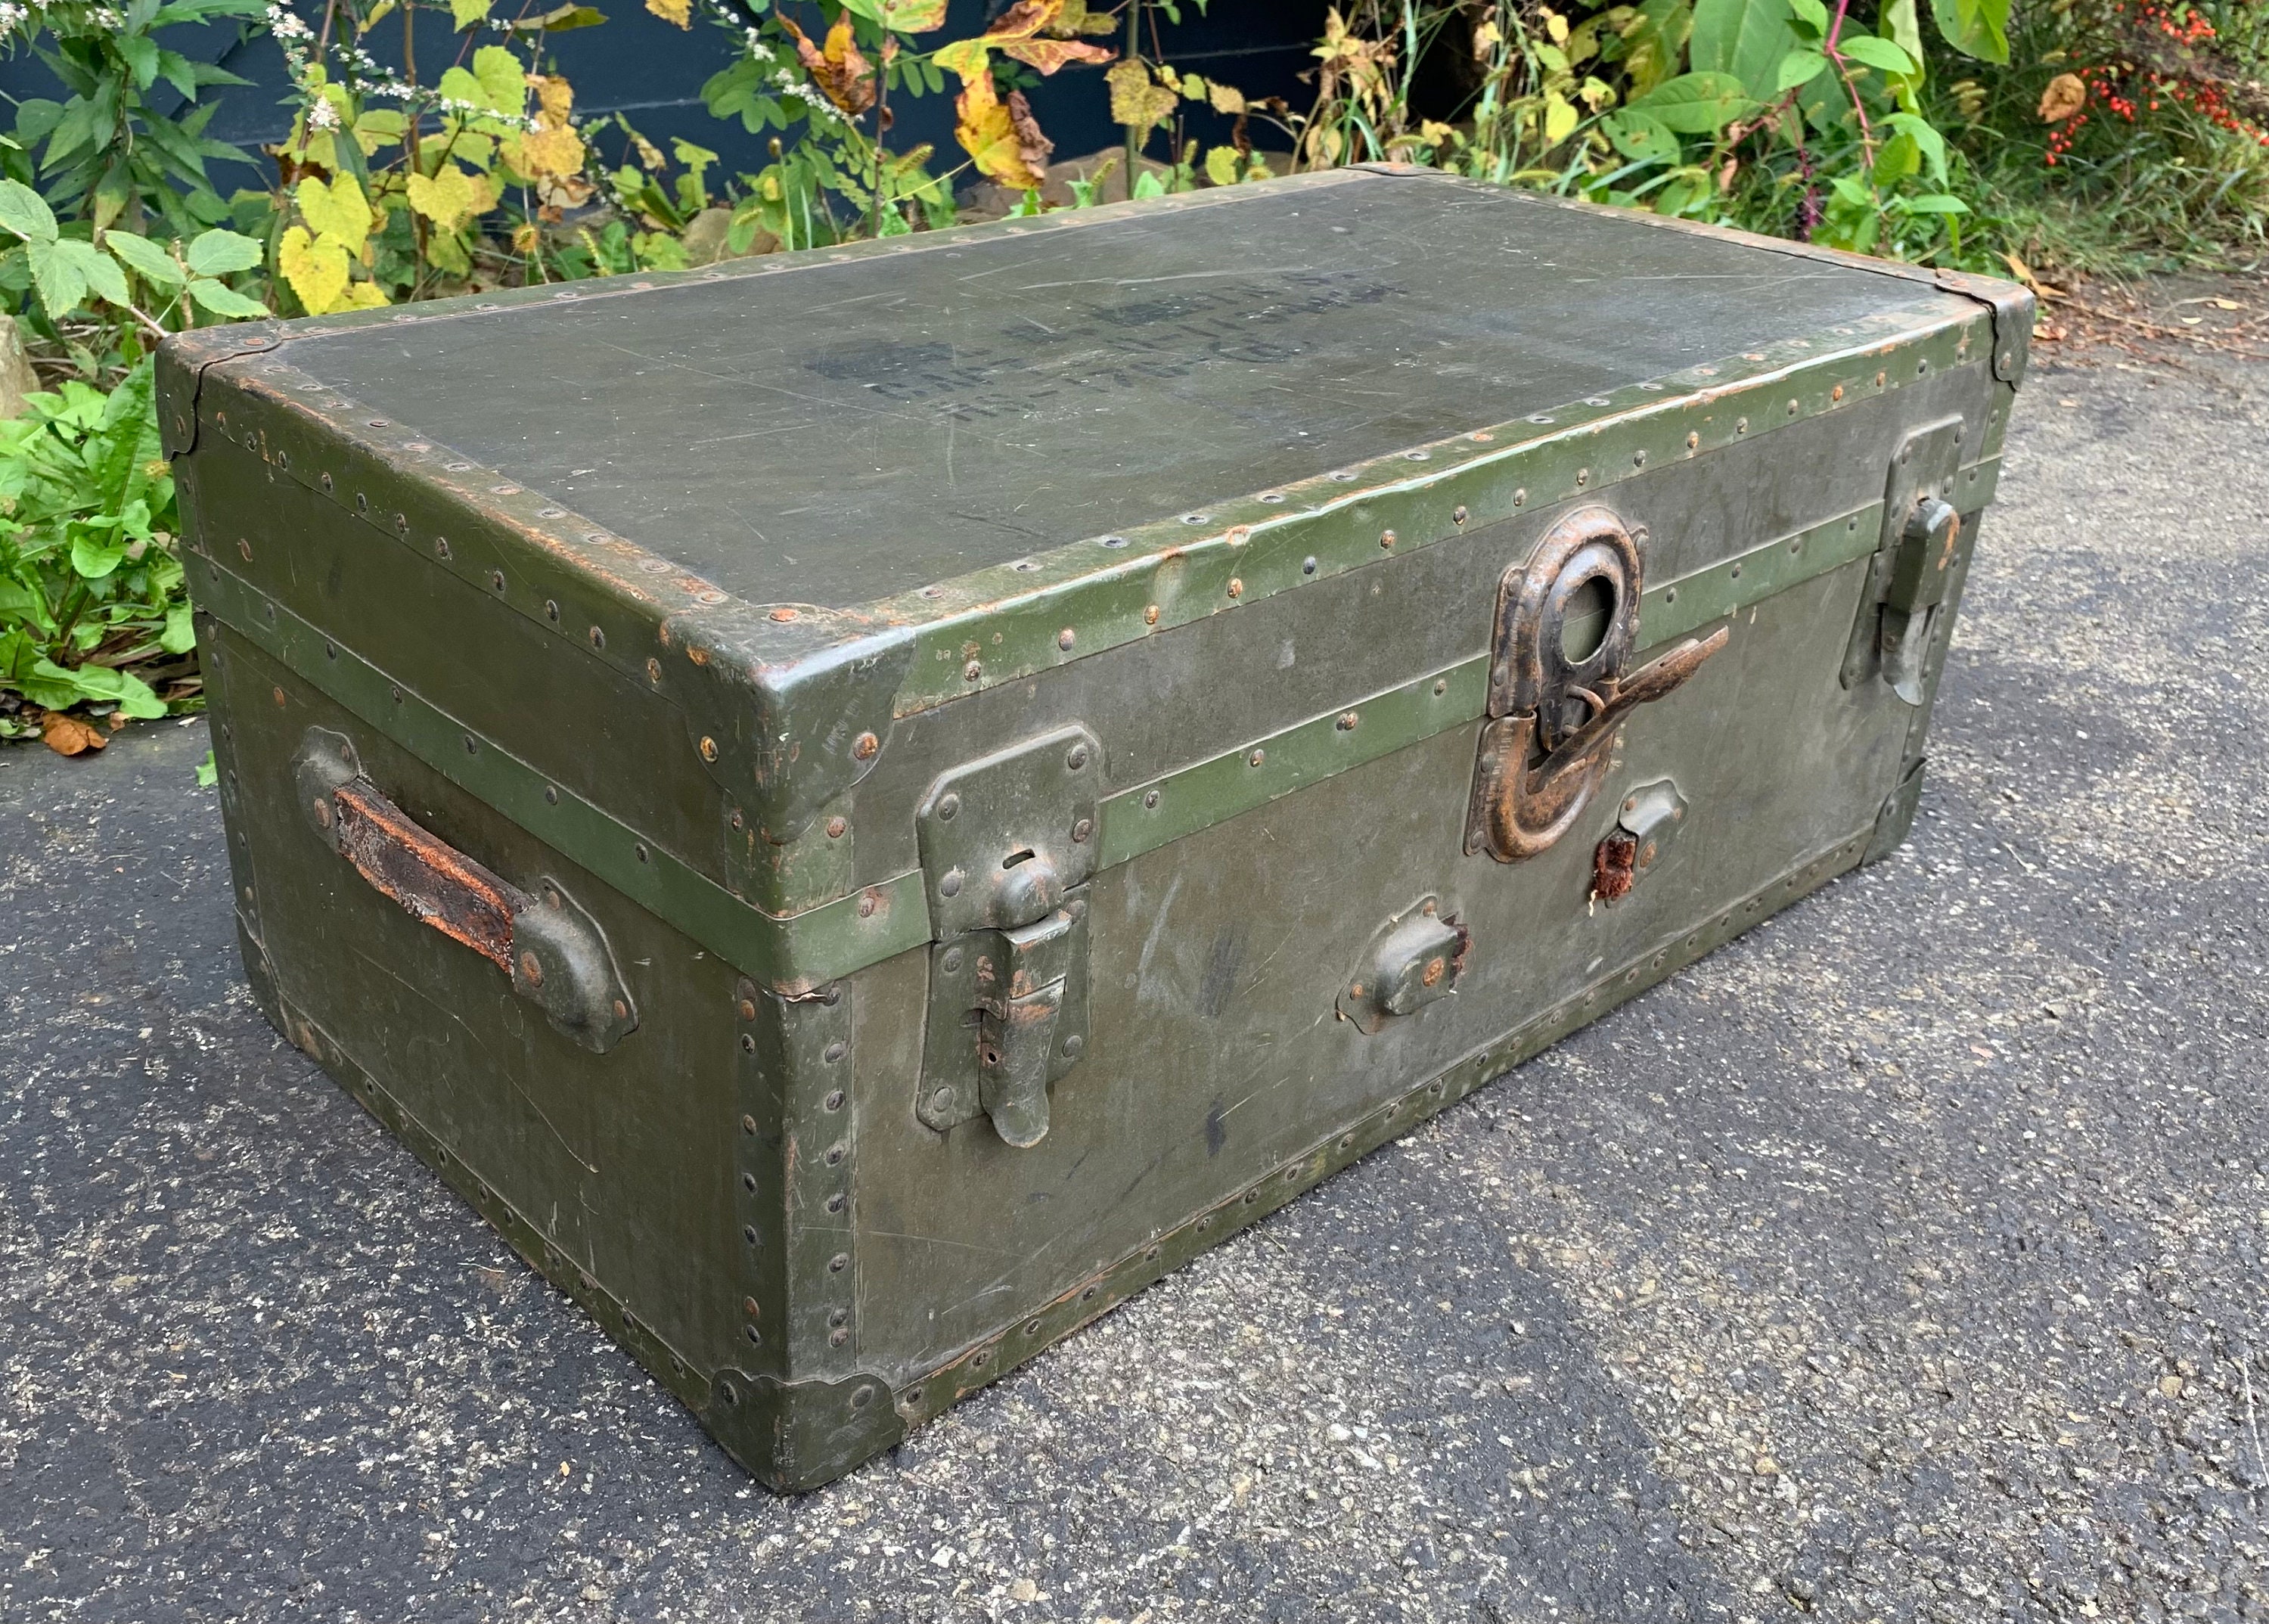 1940s Vintage Military Foot Locker Trunk With Insert Tray